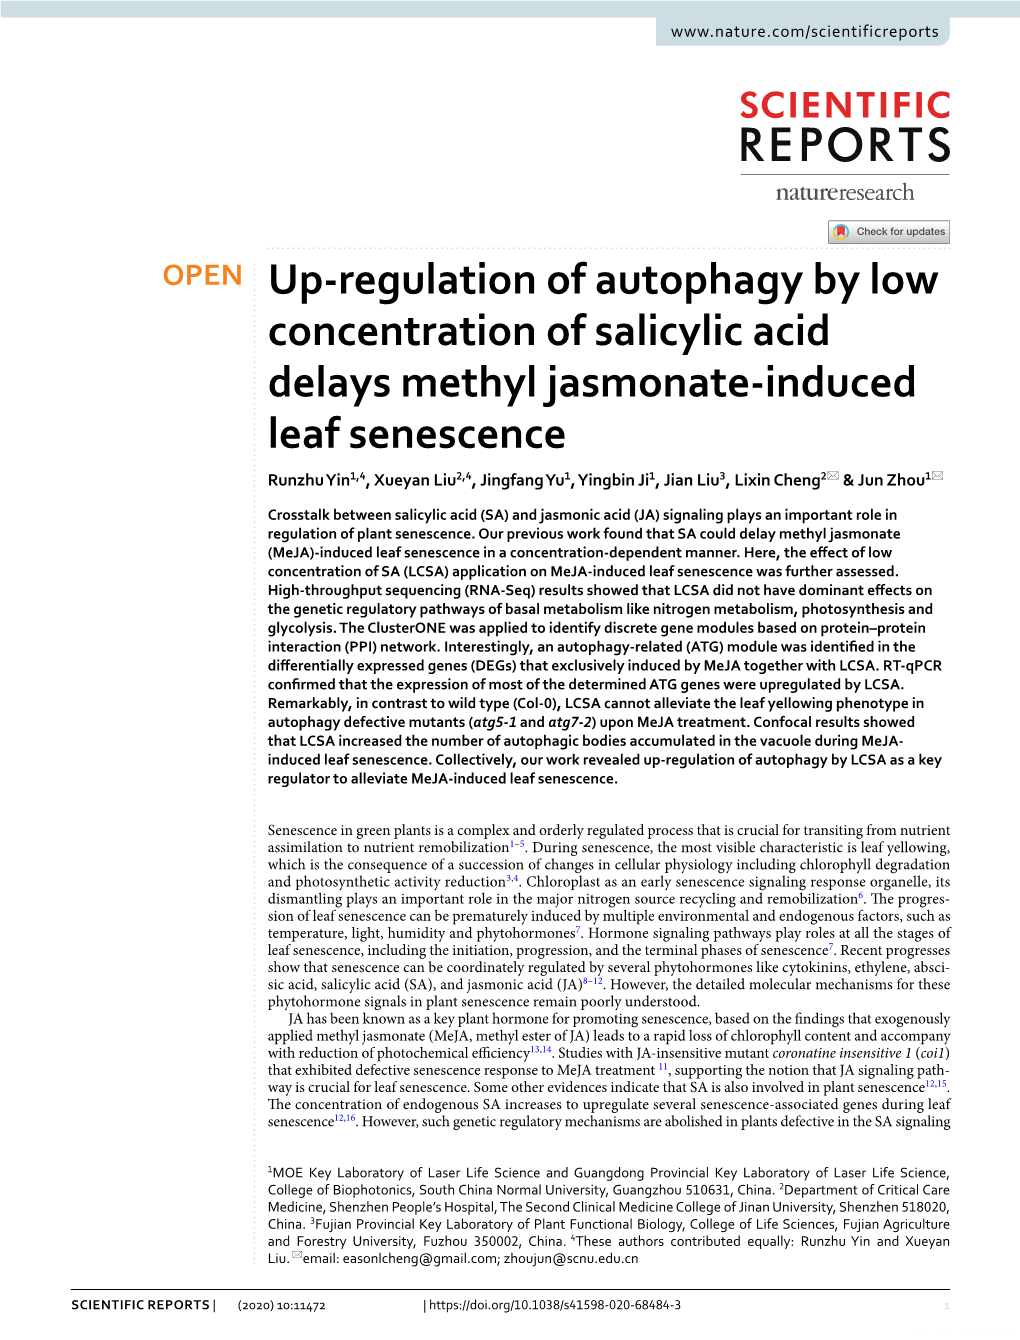 Up-Regulation of Autophagy by Low Concentration of Salicylic Acid